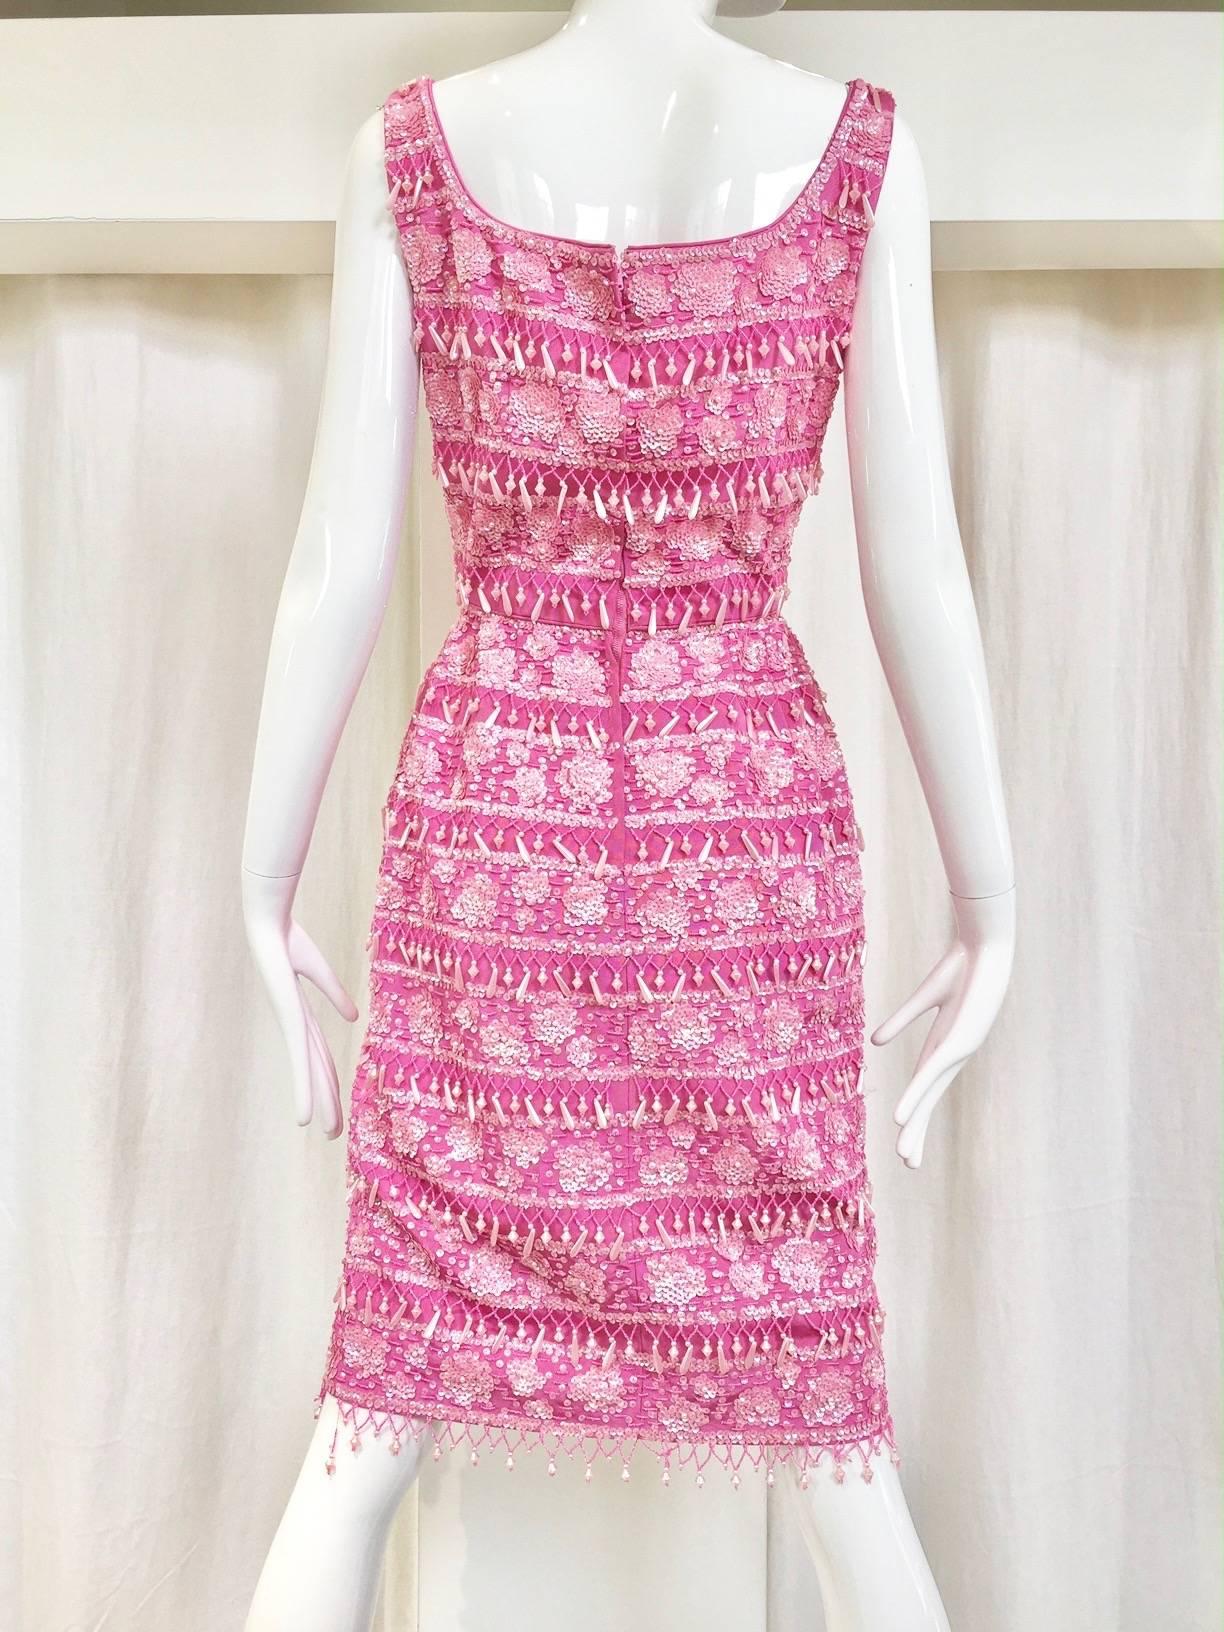  Vintage 1950s pink sheath dress with sequins and some beads.  Size: 2/4 SMALL.
 Perfect summer cocktail party dress.
Bust: 34